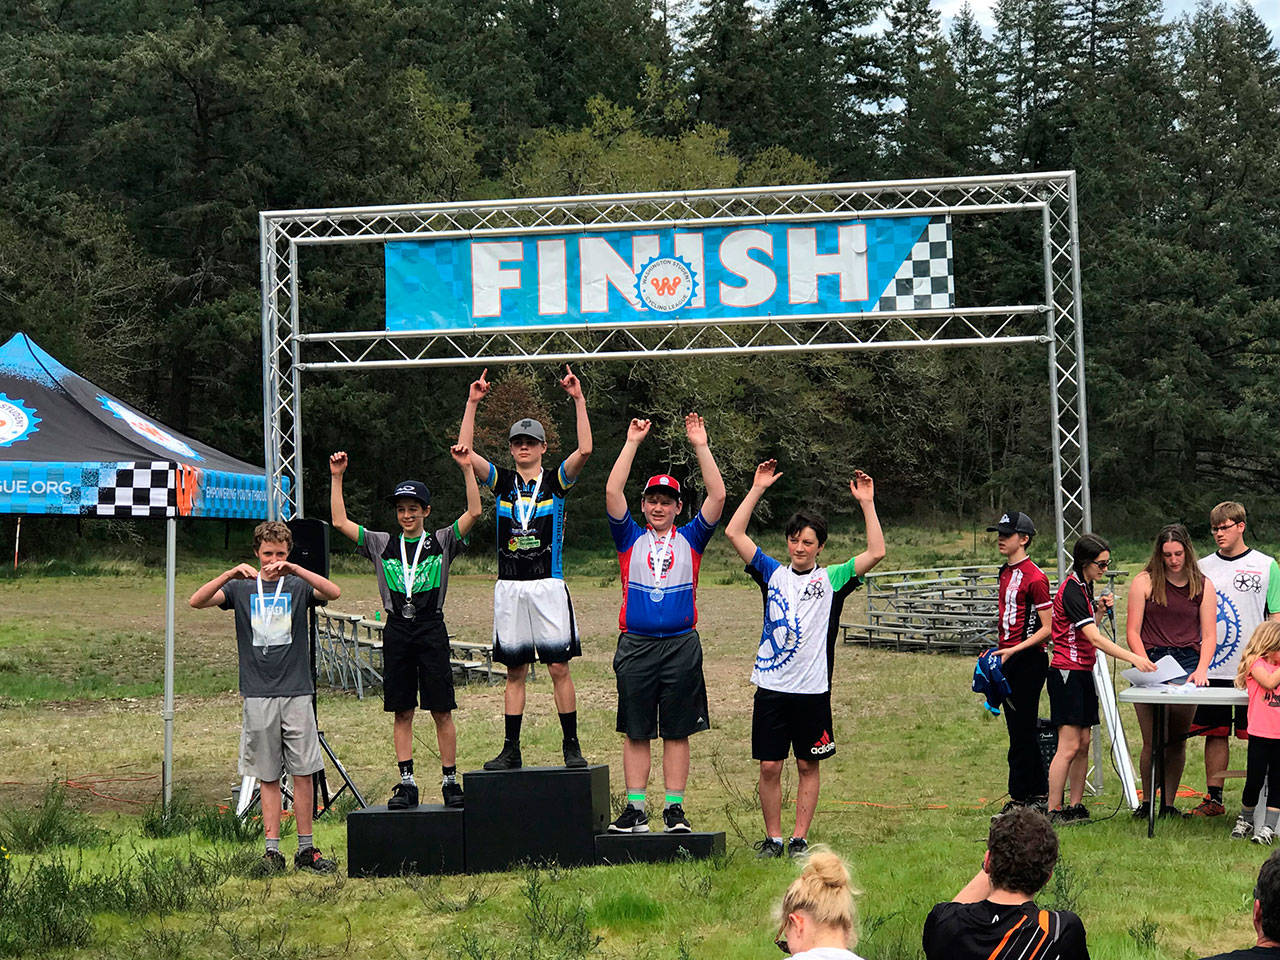 Middle school team rider TJ North (far right) of the Gear Grinders celebrates his medal at the finish line.